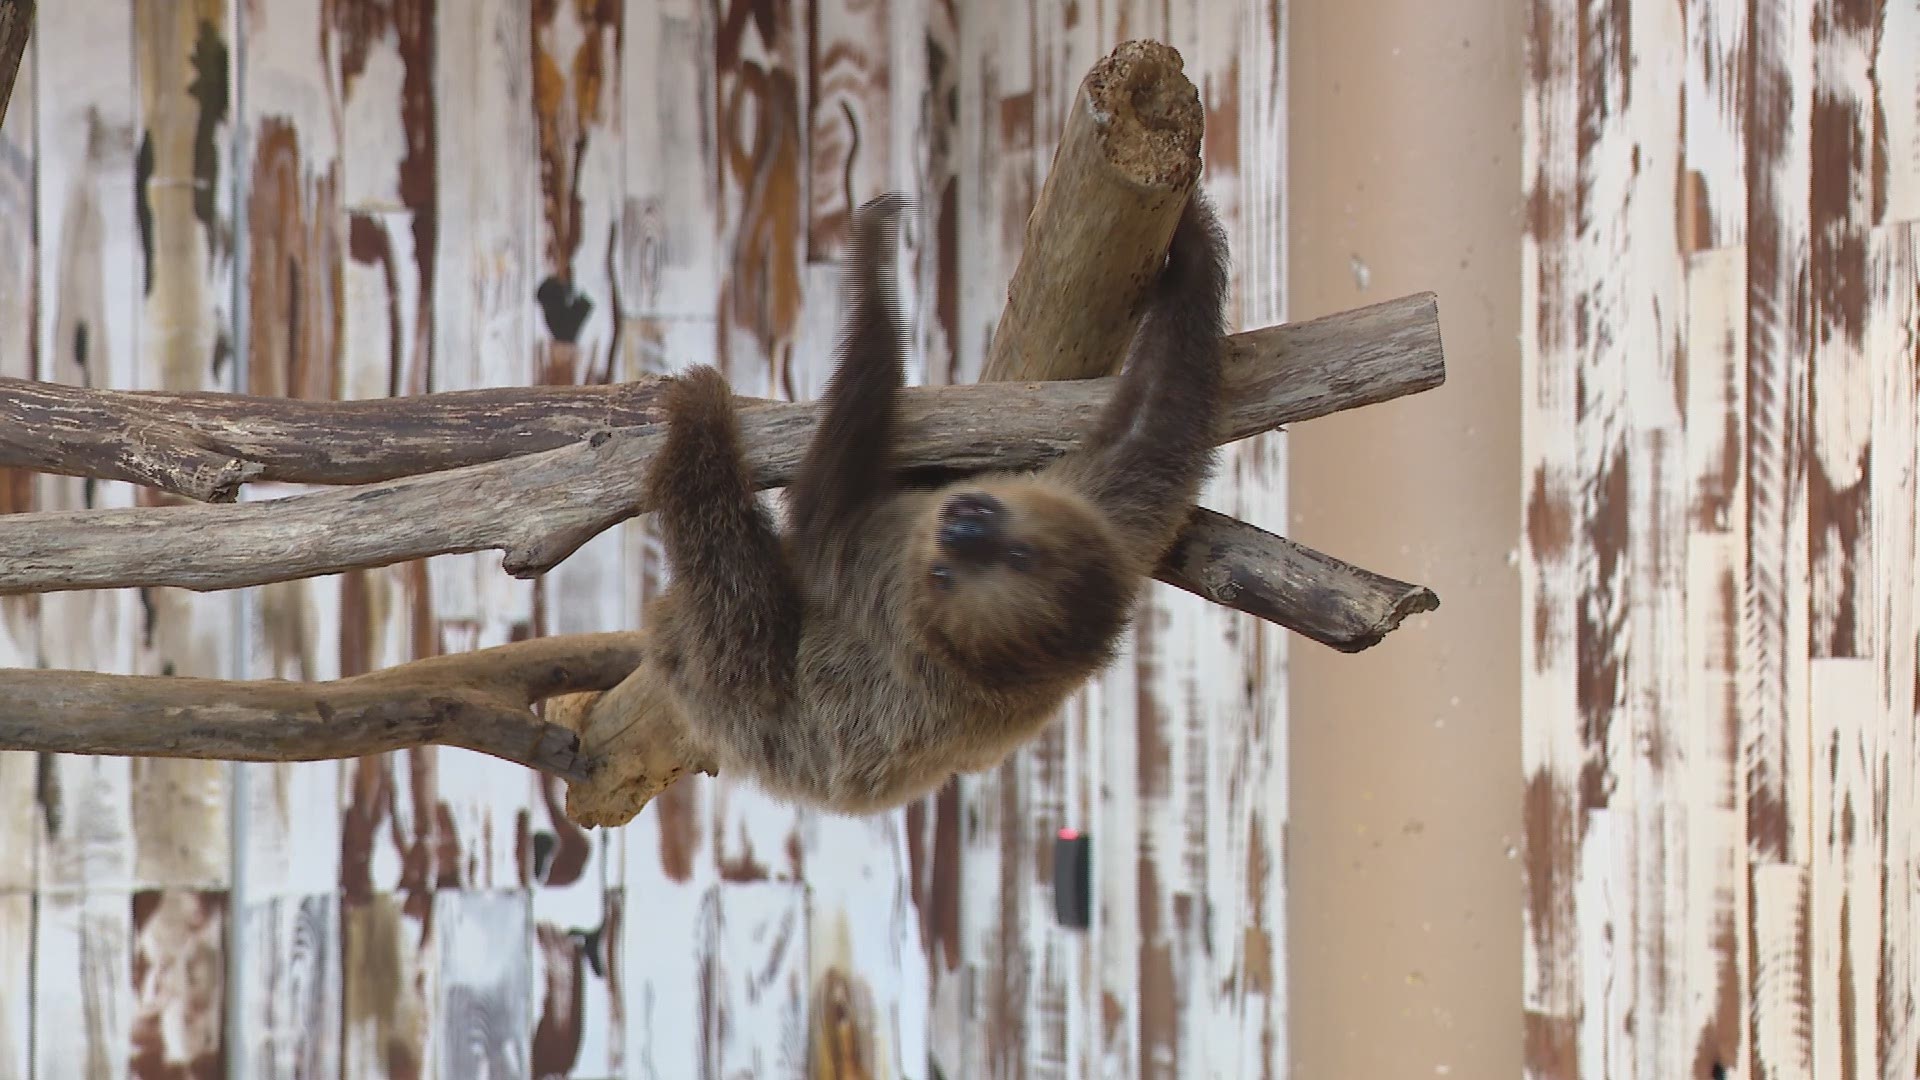 Coconut is a Linnaeus’ two-toed sloth. She will celebrate her first birthday on Feb. 20.